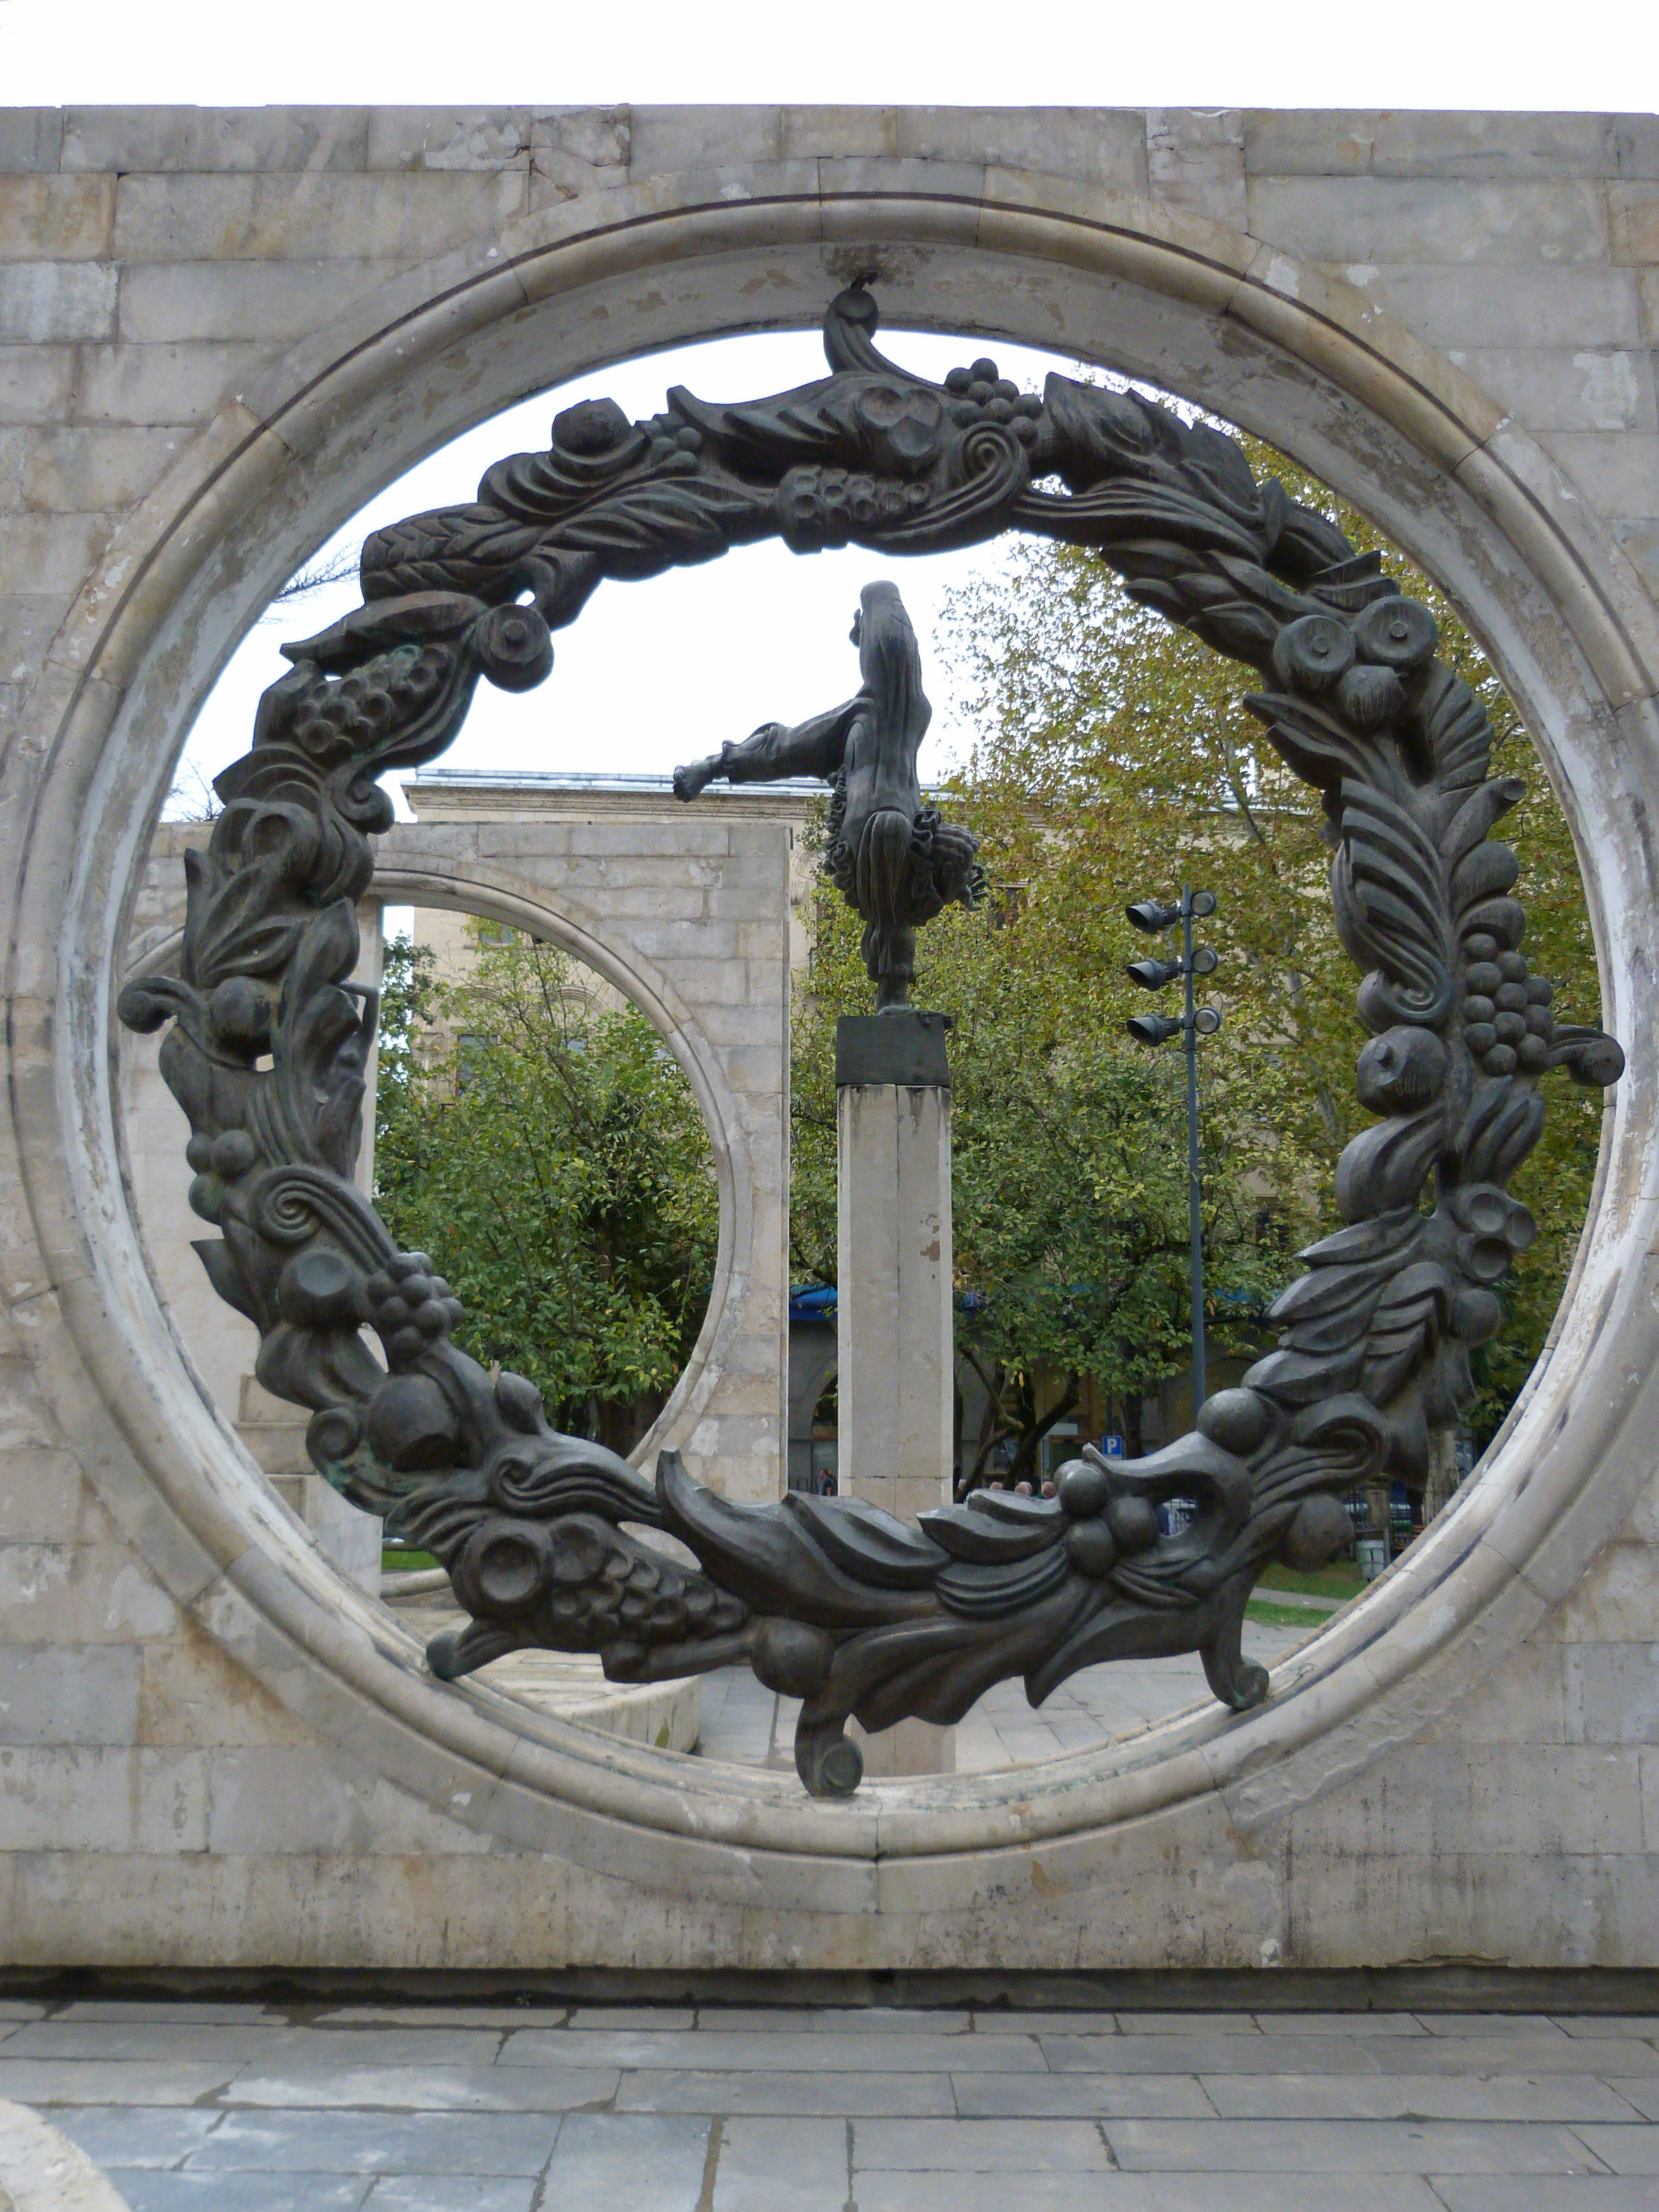 Glory to Labour Monument in Kutaisi